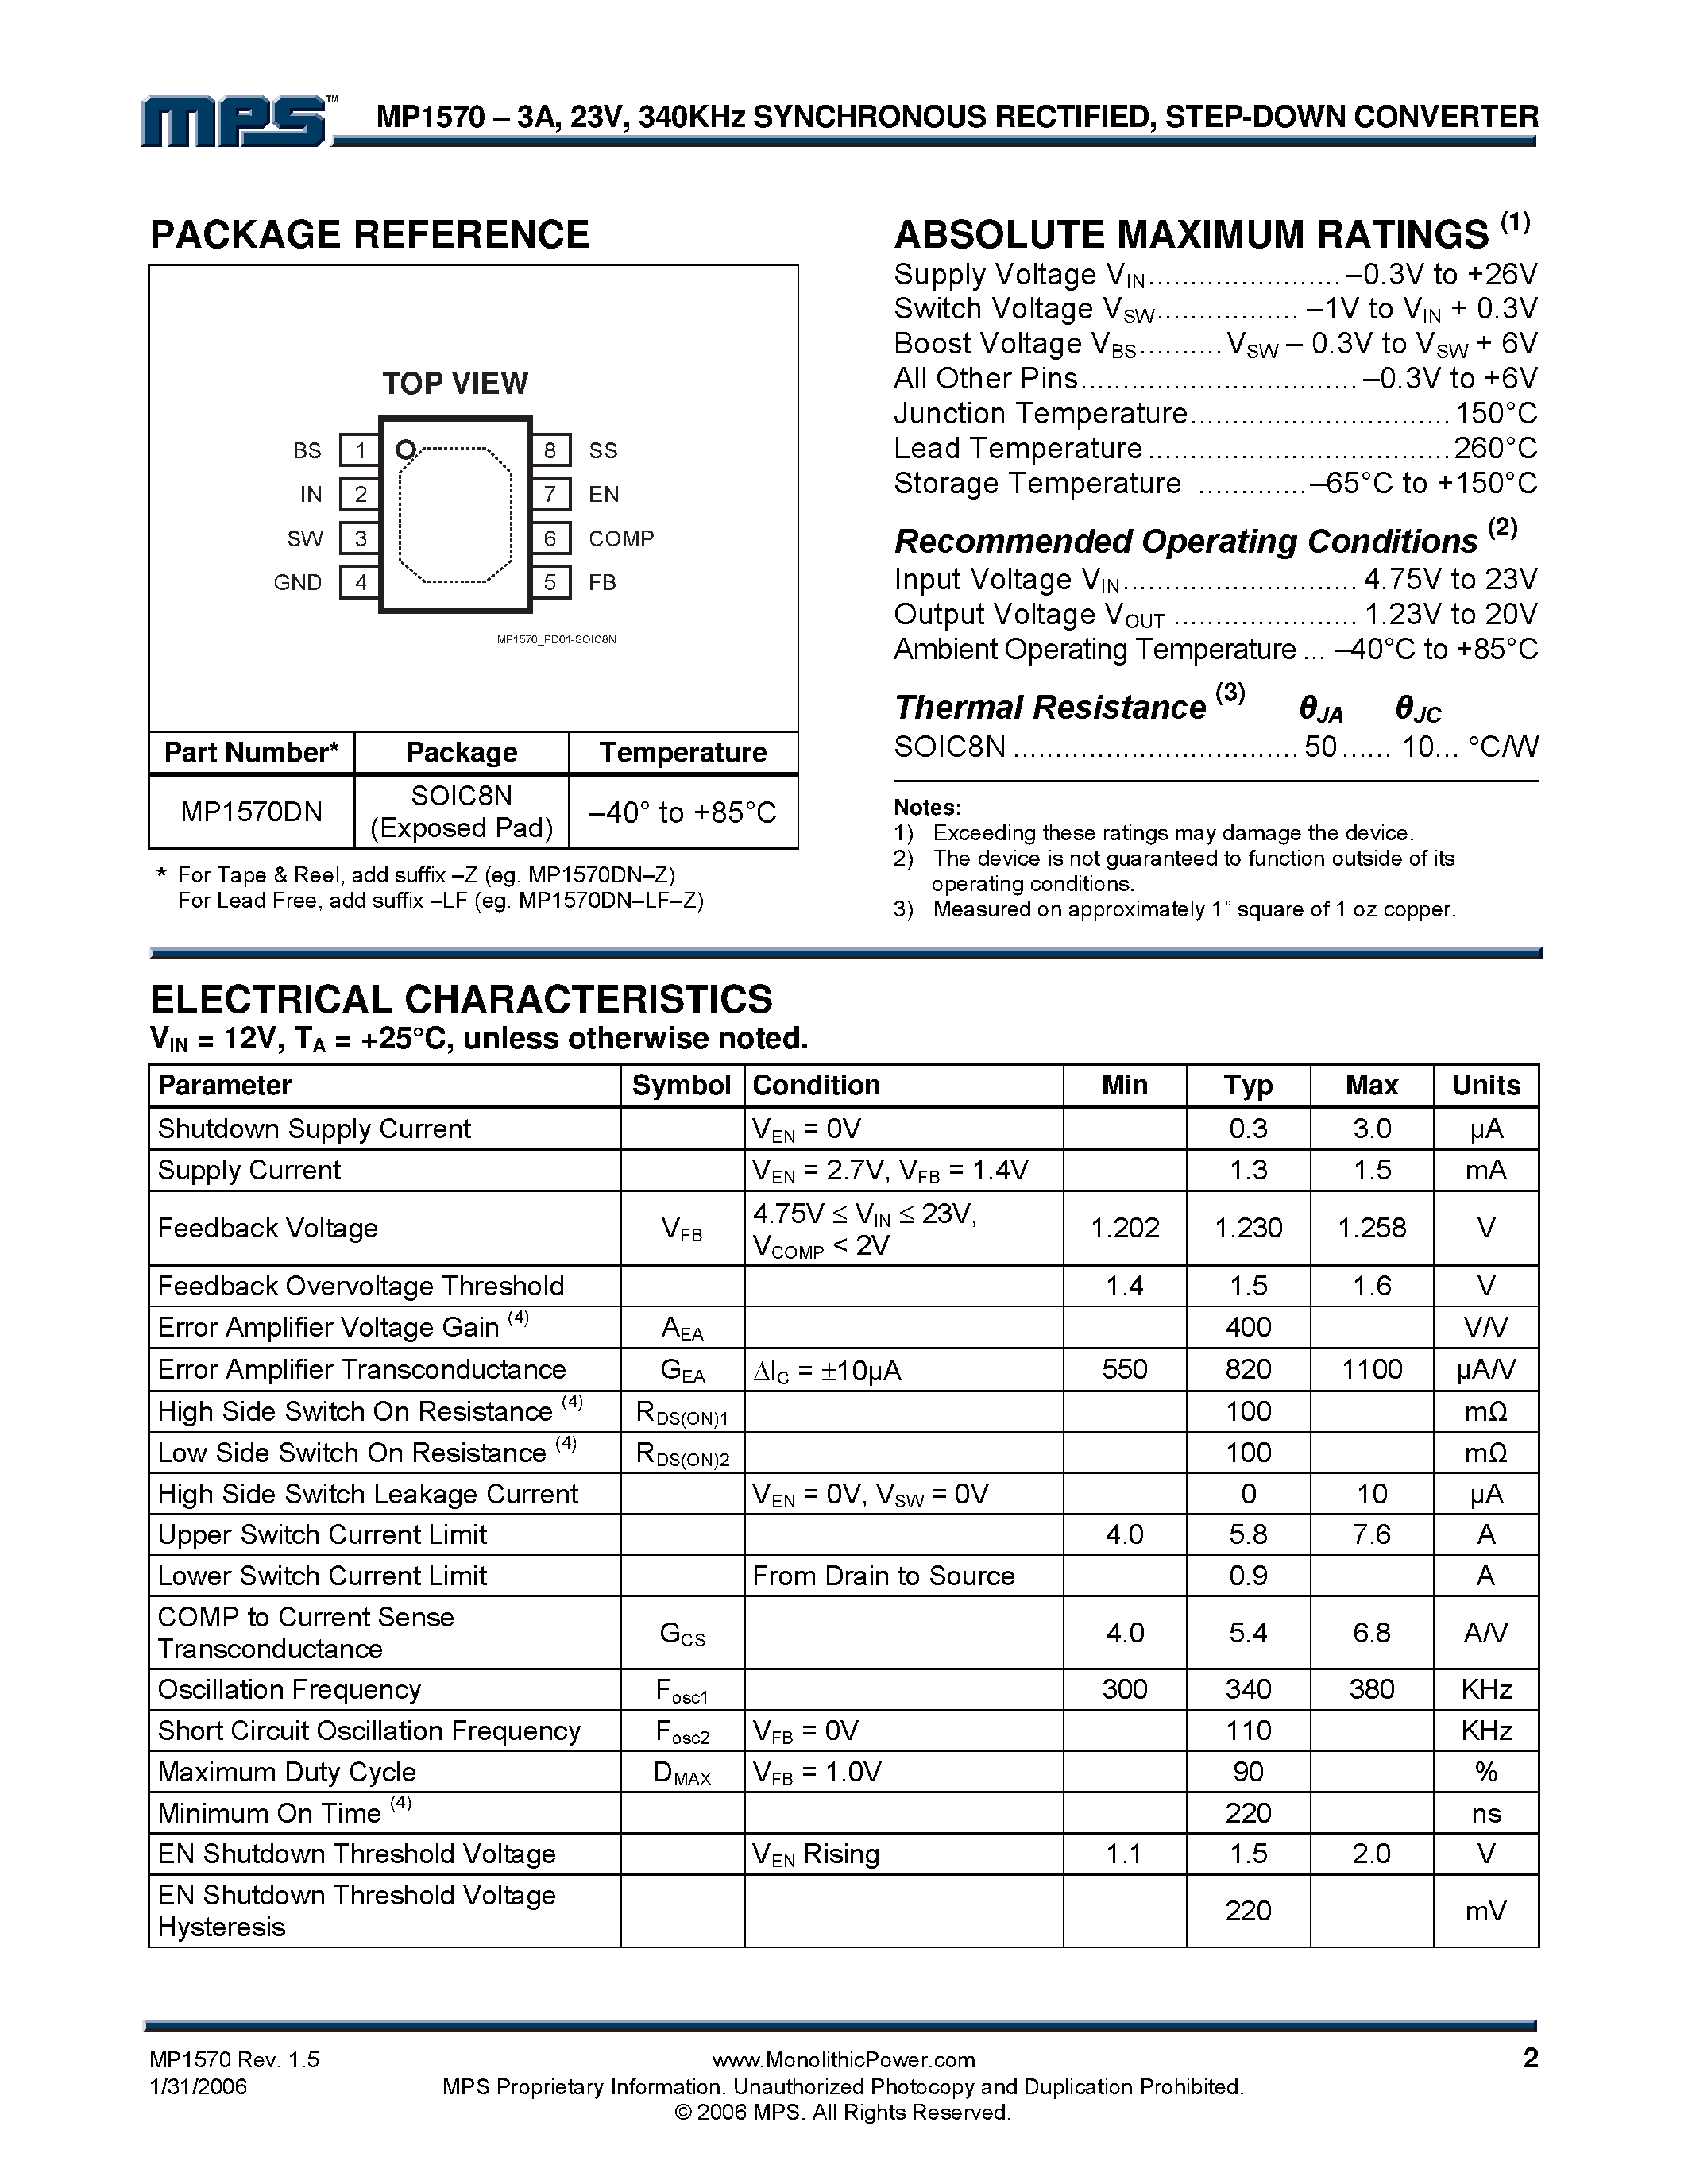 Datasheet MP1570 - 340KHz Synchronous Rectified Step-Down Converter page 2